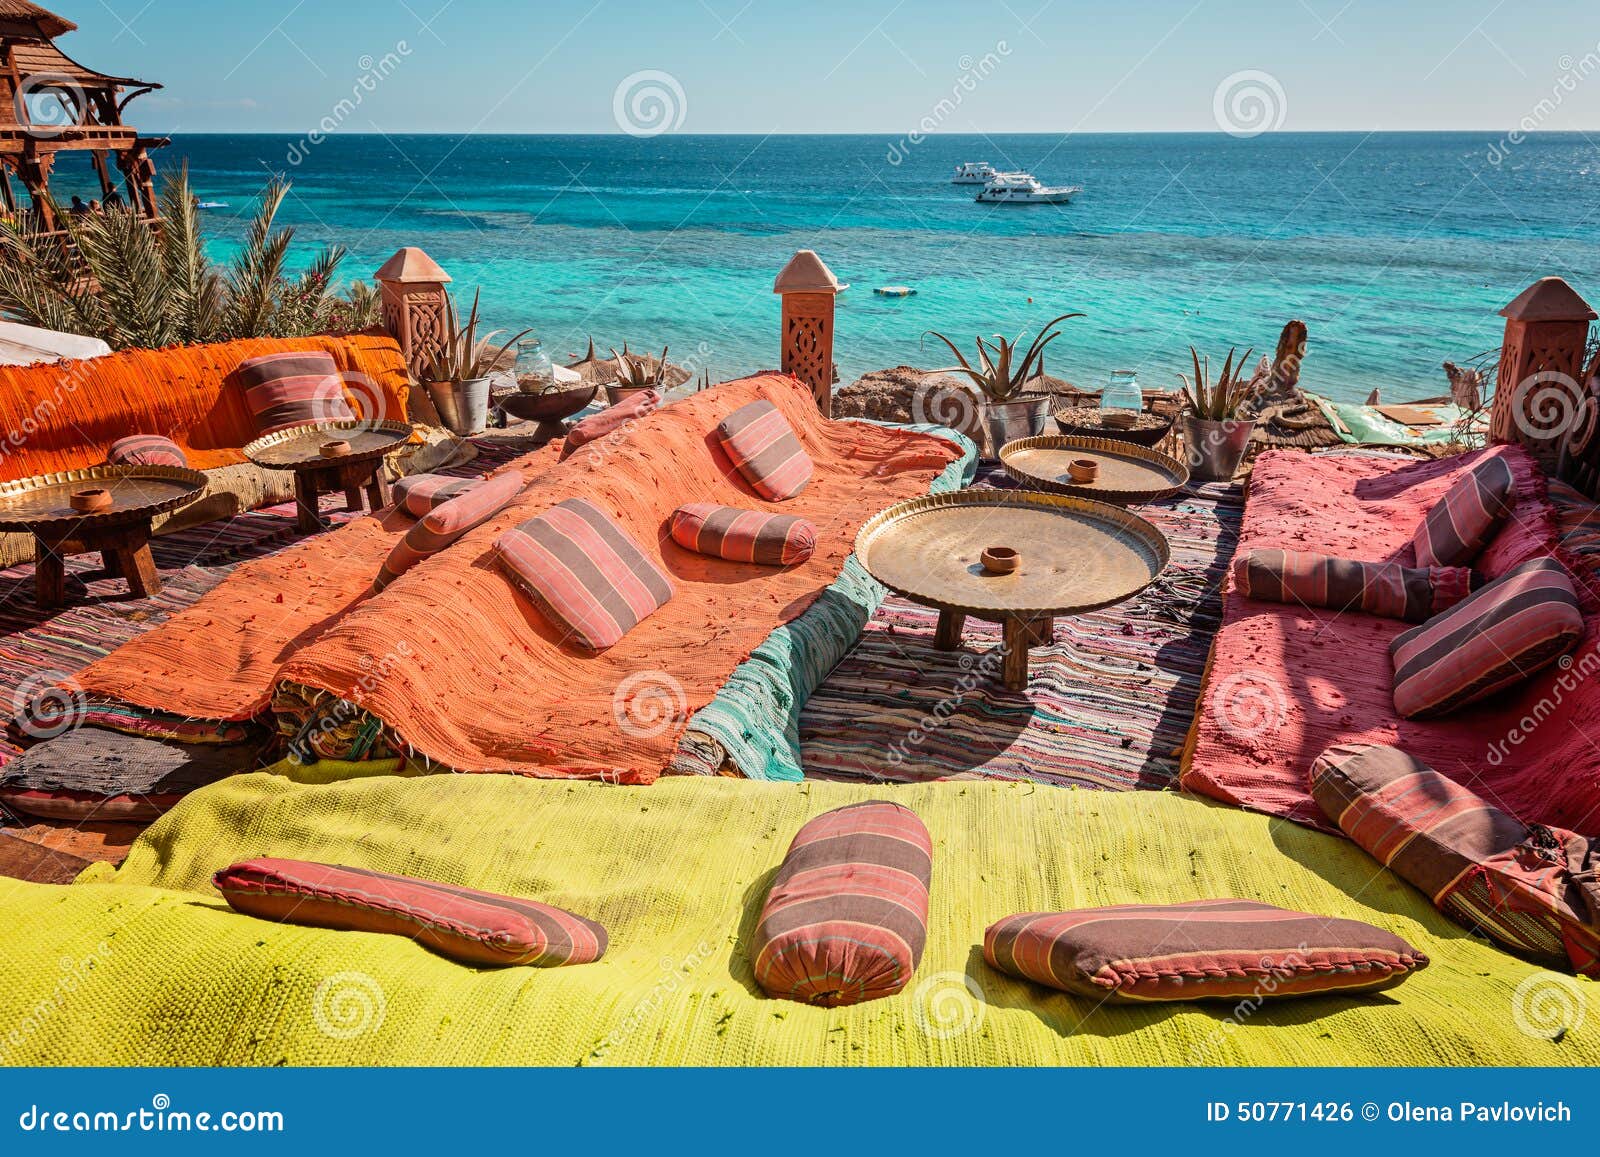 Arabian Cafe on the Red Sea Coast Stock Photo - Image of chair, holiday ...